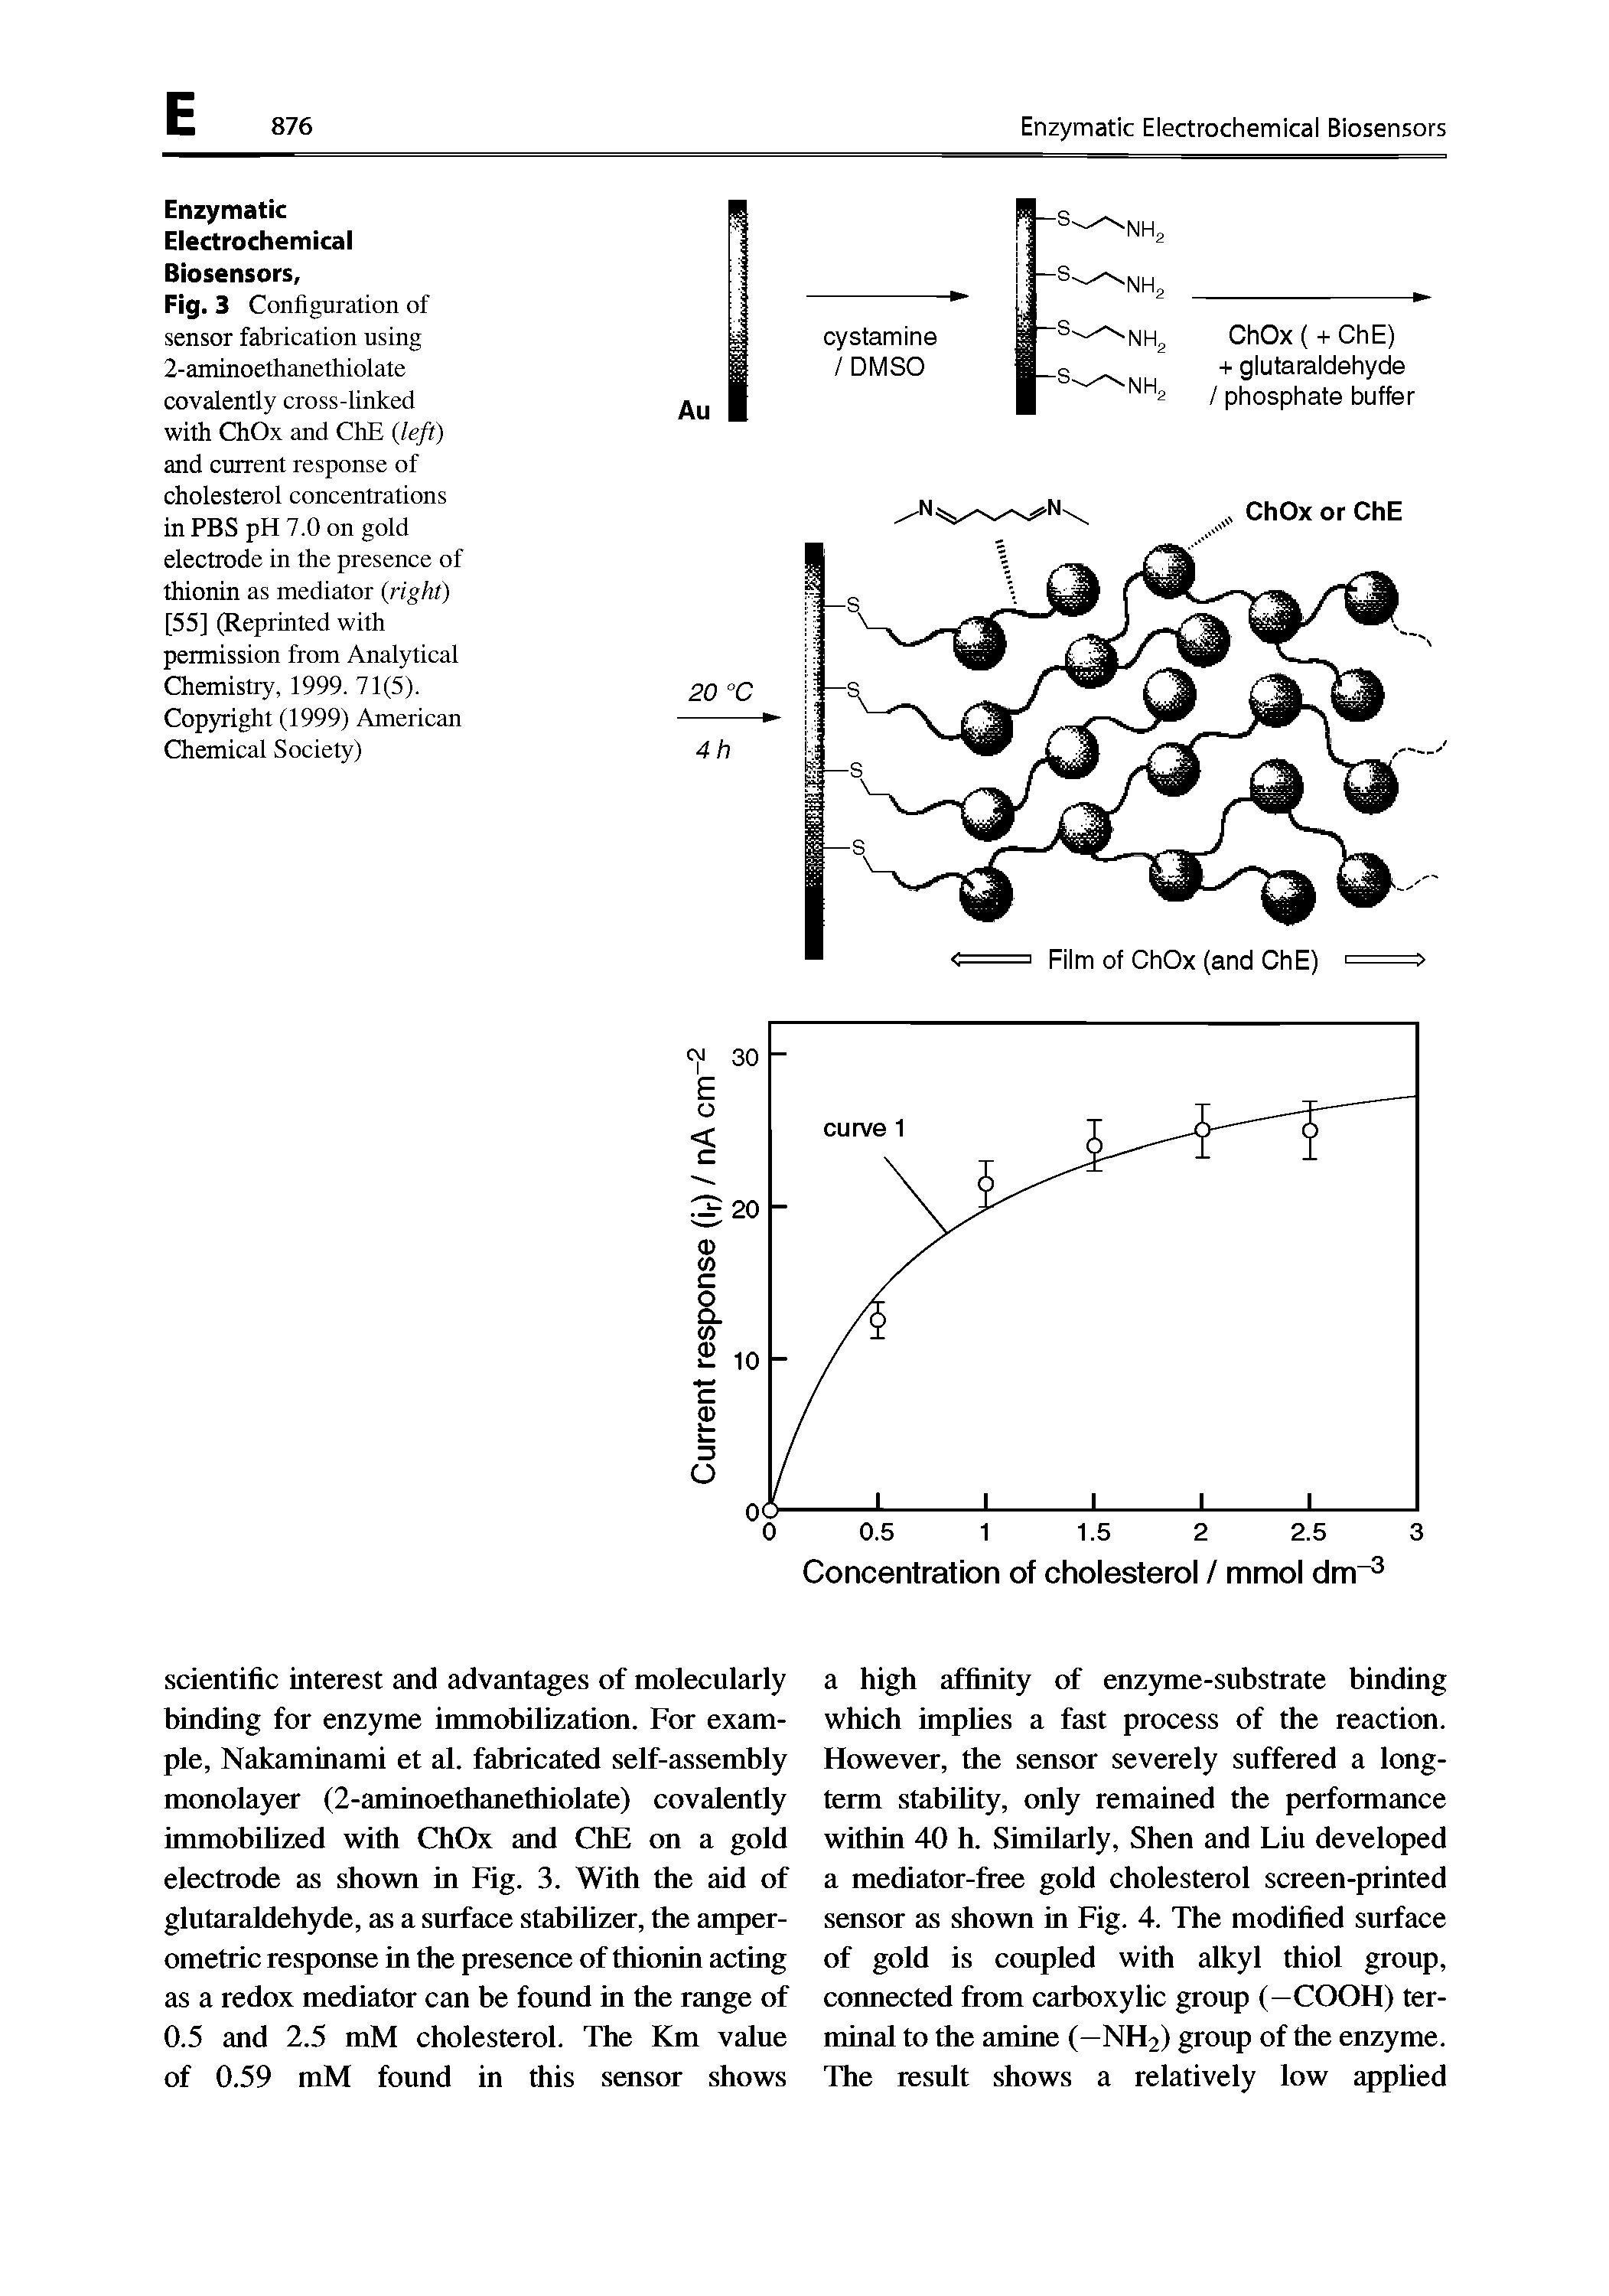 Fig. 3 Configuration of sensor fabrication using 2-aminoethanethiolate covalently cross-linked with ChOx and CKE left) and current response of cholesterol concentrations in PBS pH 7.0 on gold electrode in the presence of thionin as mediator (right) [55] (Reprinted with permission from Analytical Chemistry, 1999. 71(5). Copyright (1999) American Chemical Society)...